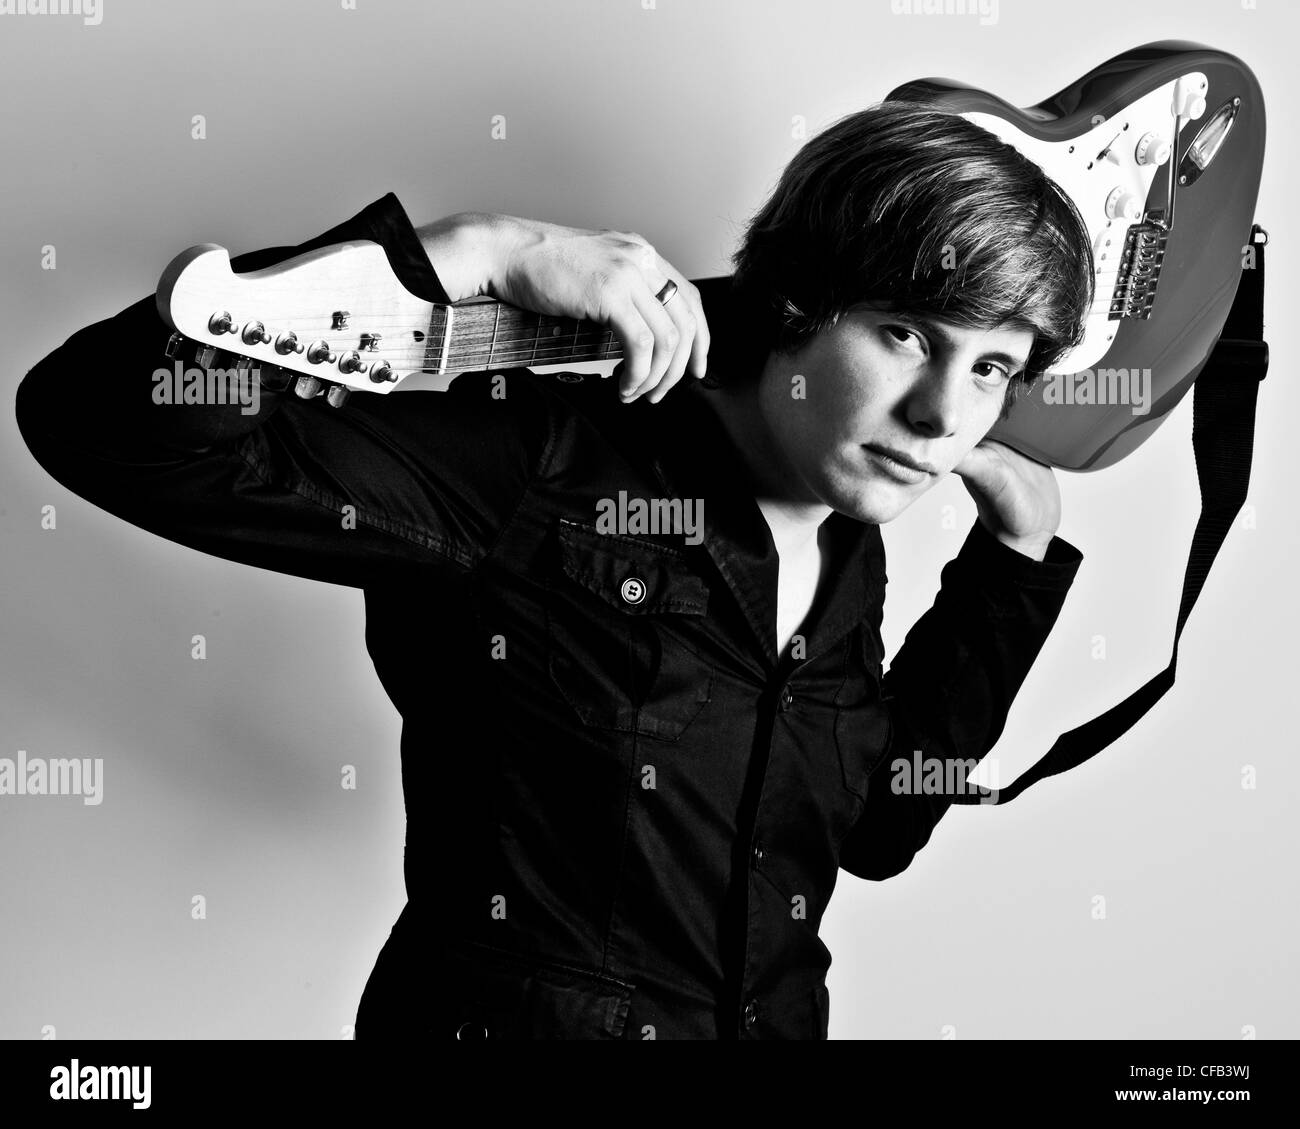 Half length studio black and white portrait of man wearing dark shirt holding electric guitar behind his head on his shoulders Stock Photo